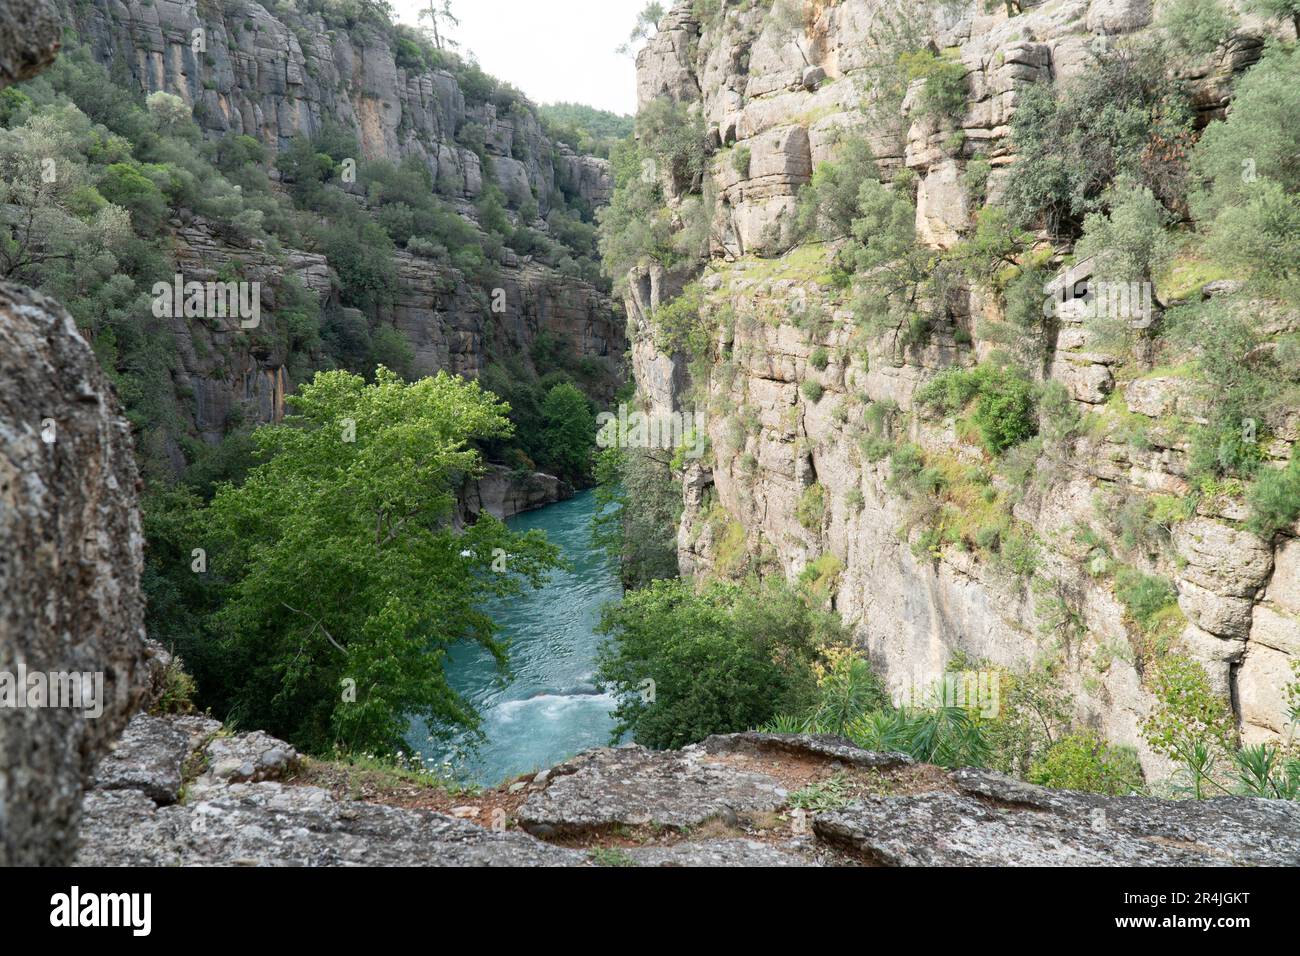 Natural landscape. River between mountain canyon. Green trees in stone. selective focus Stock Photo